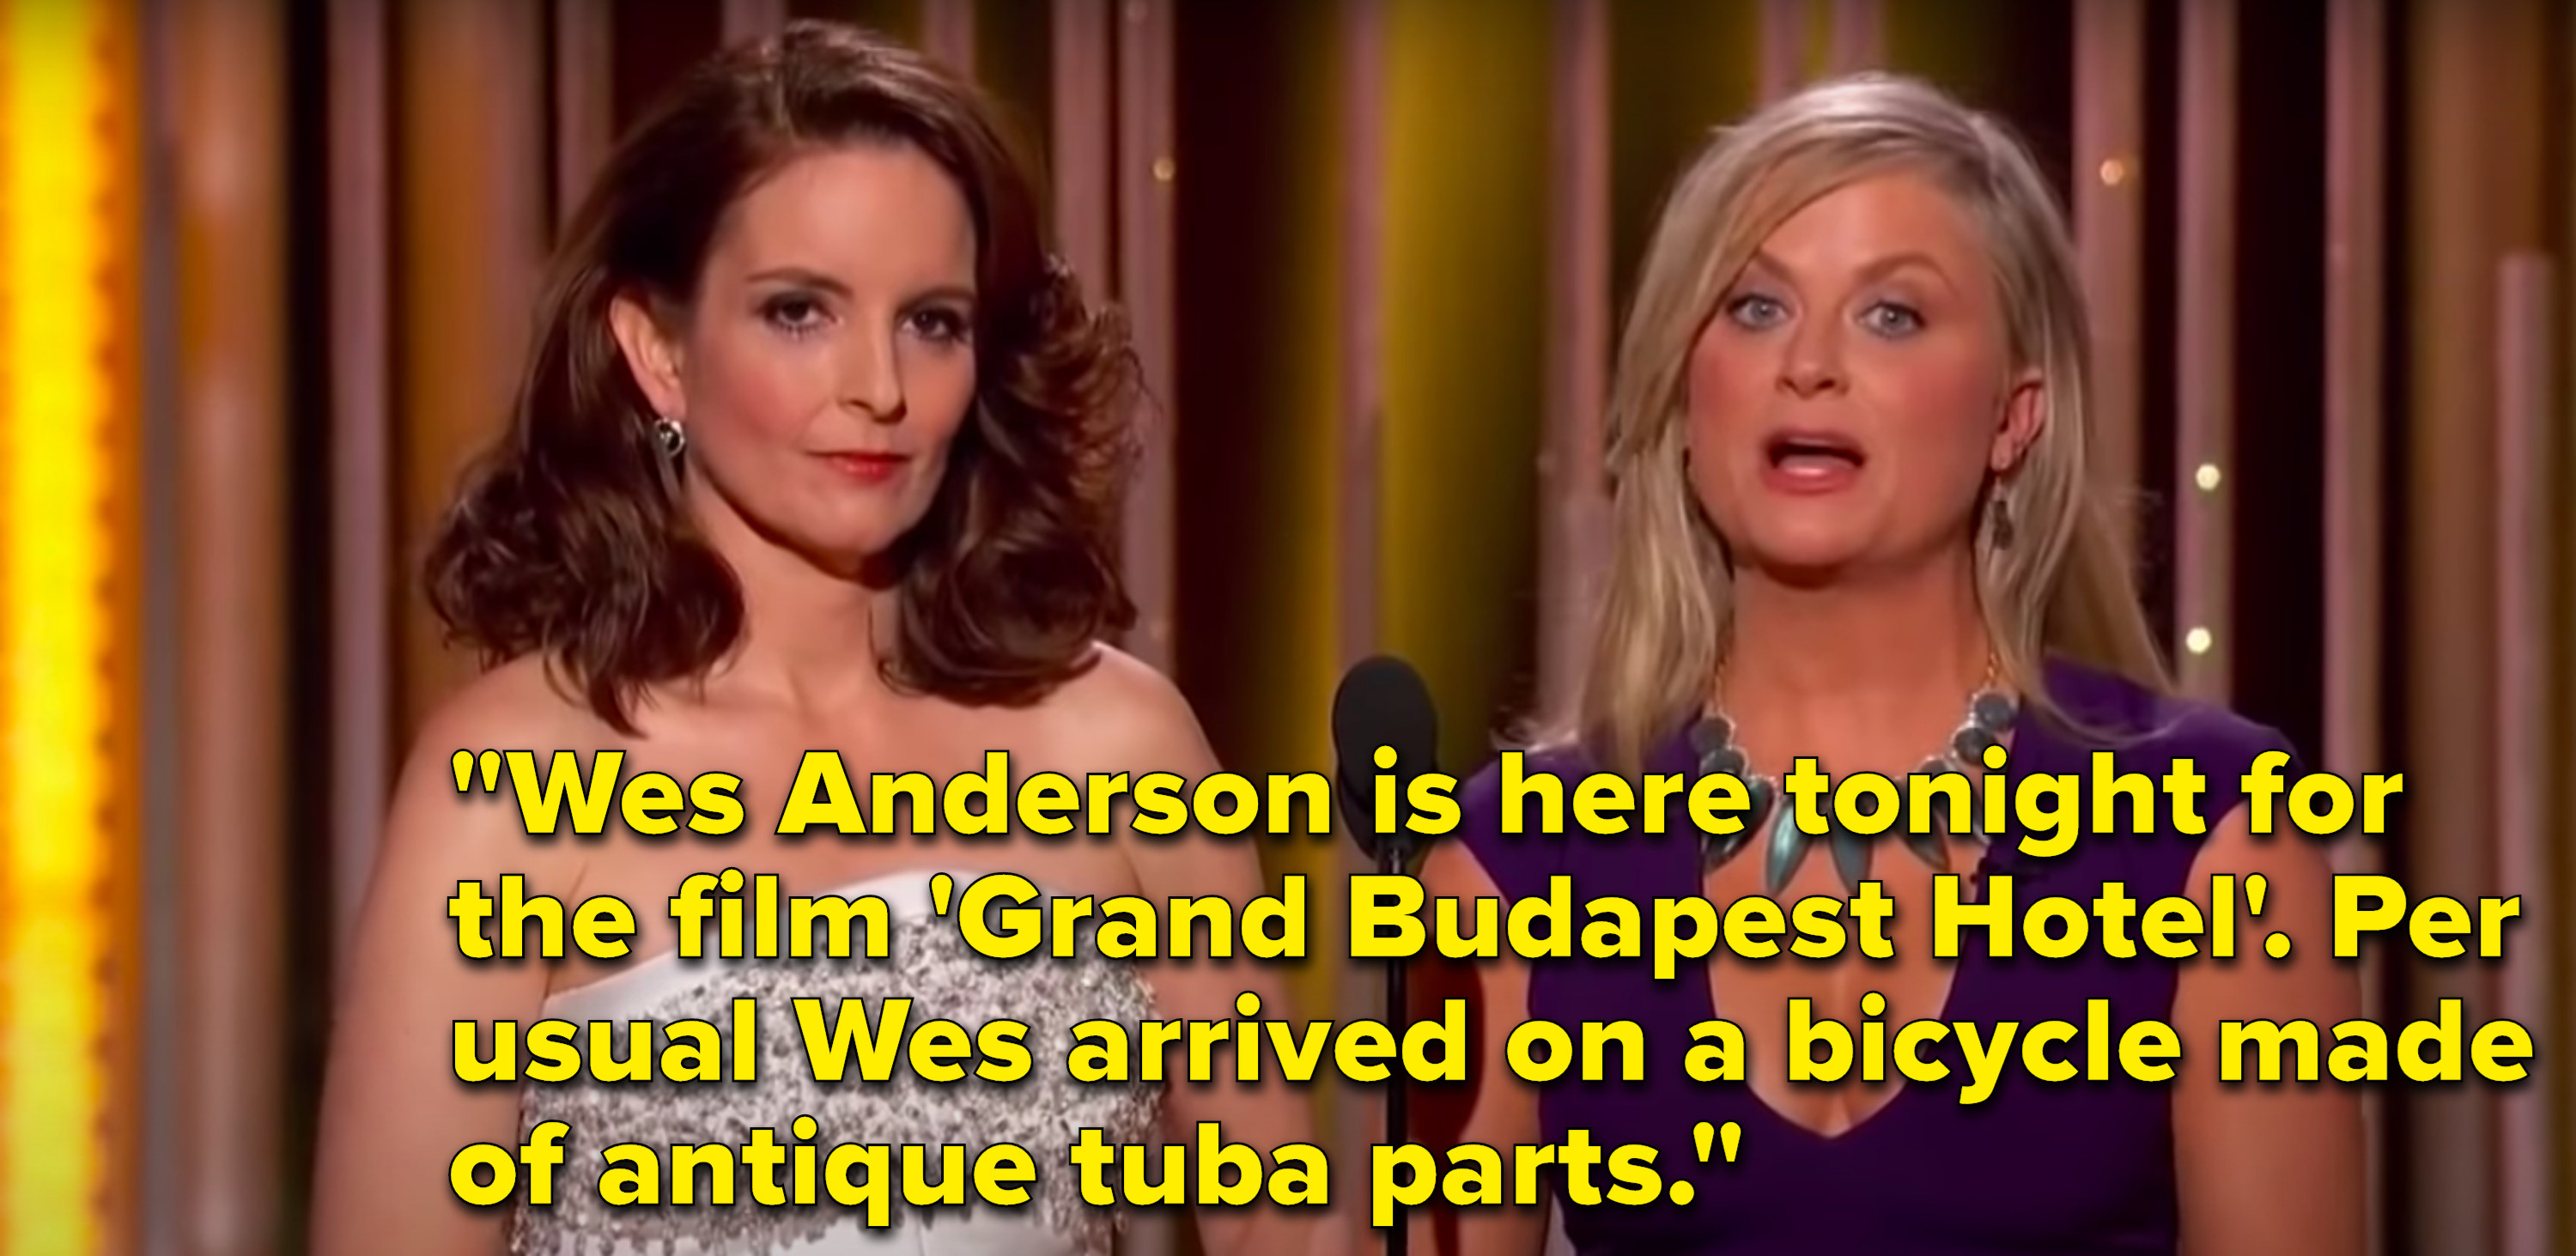 Poehler says, &quot;Wes Anderson is here tonight for the film &#x27;Grand Budapest Hotel&#x27;, per usual Wes arrived on a bicycle made of antique tuba parts&quot;